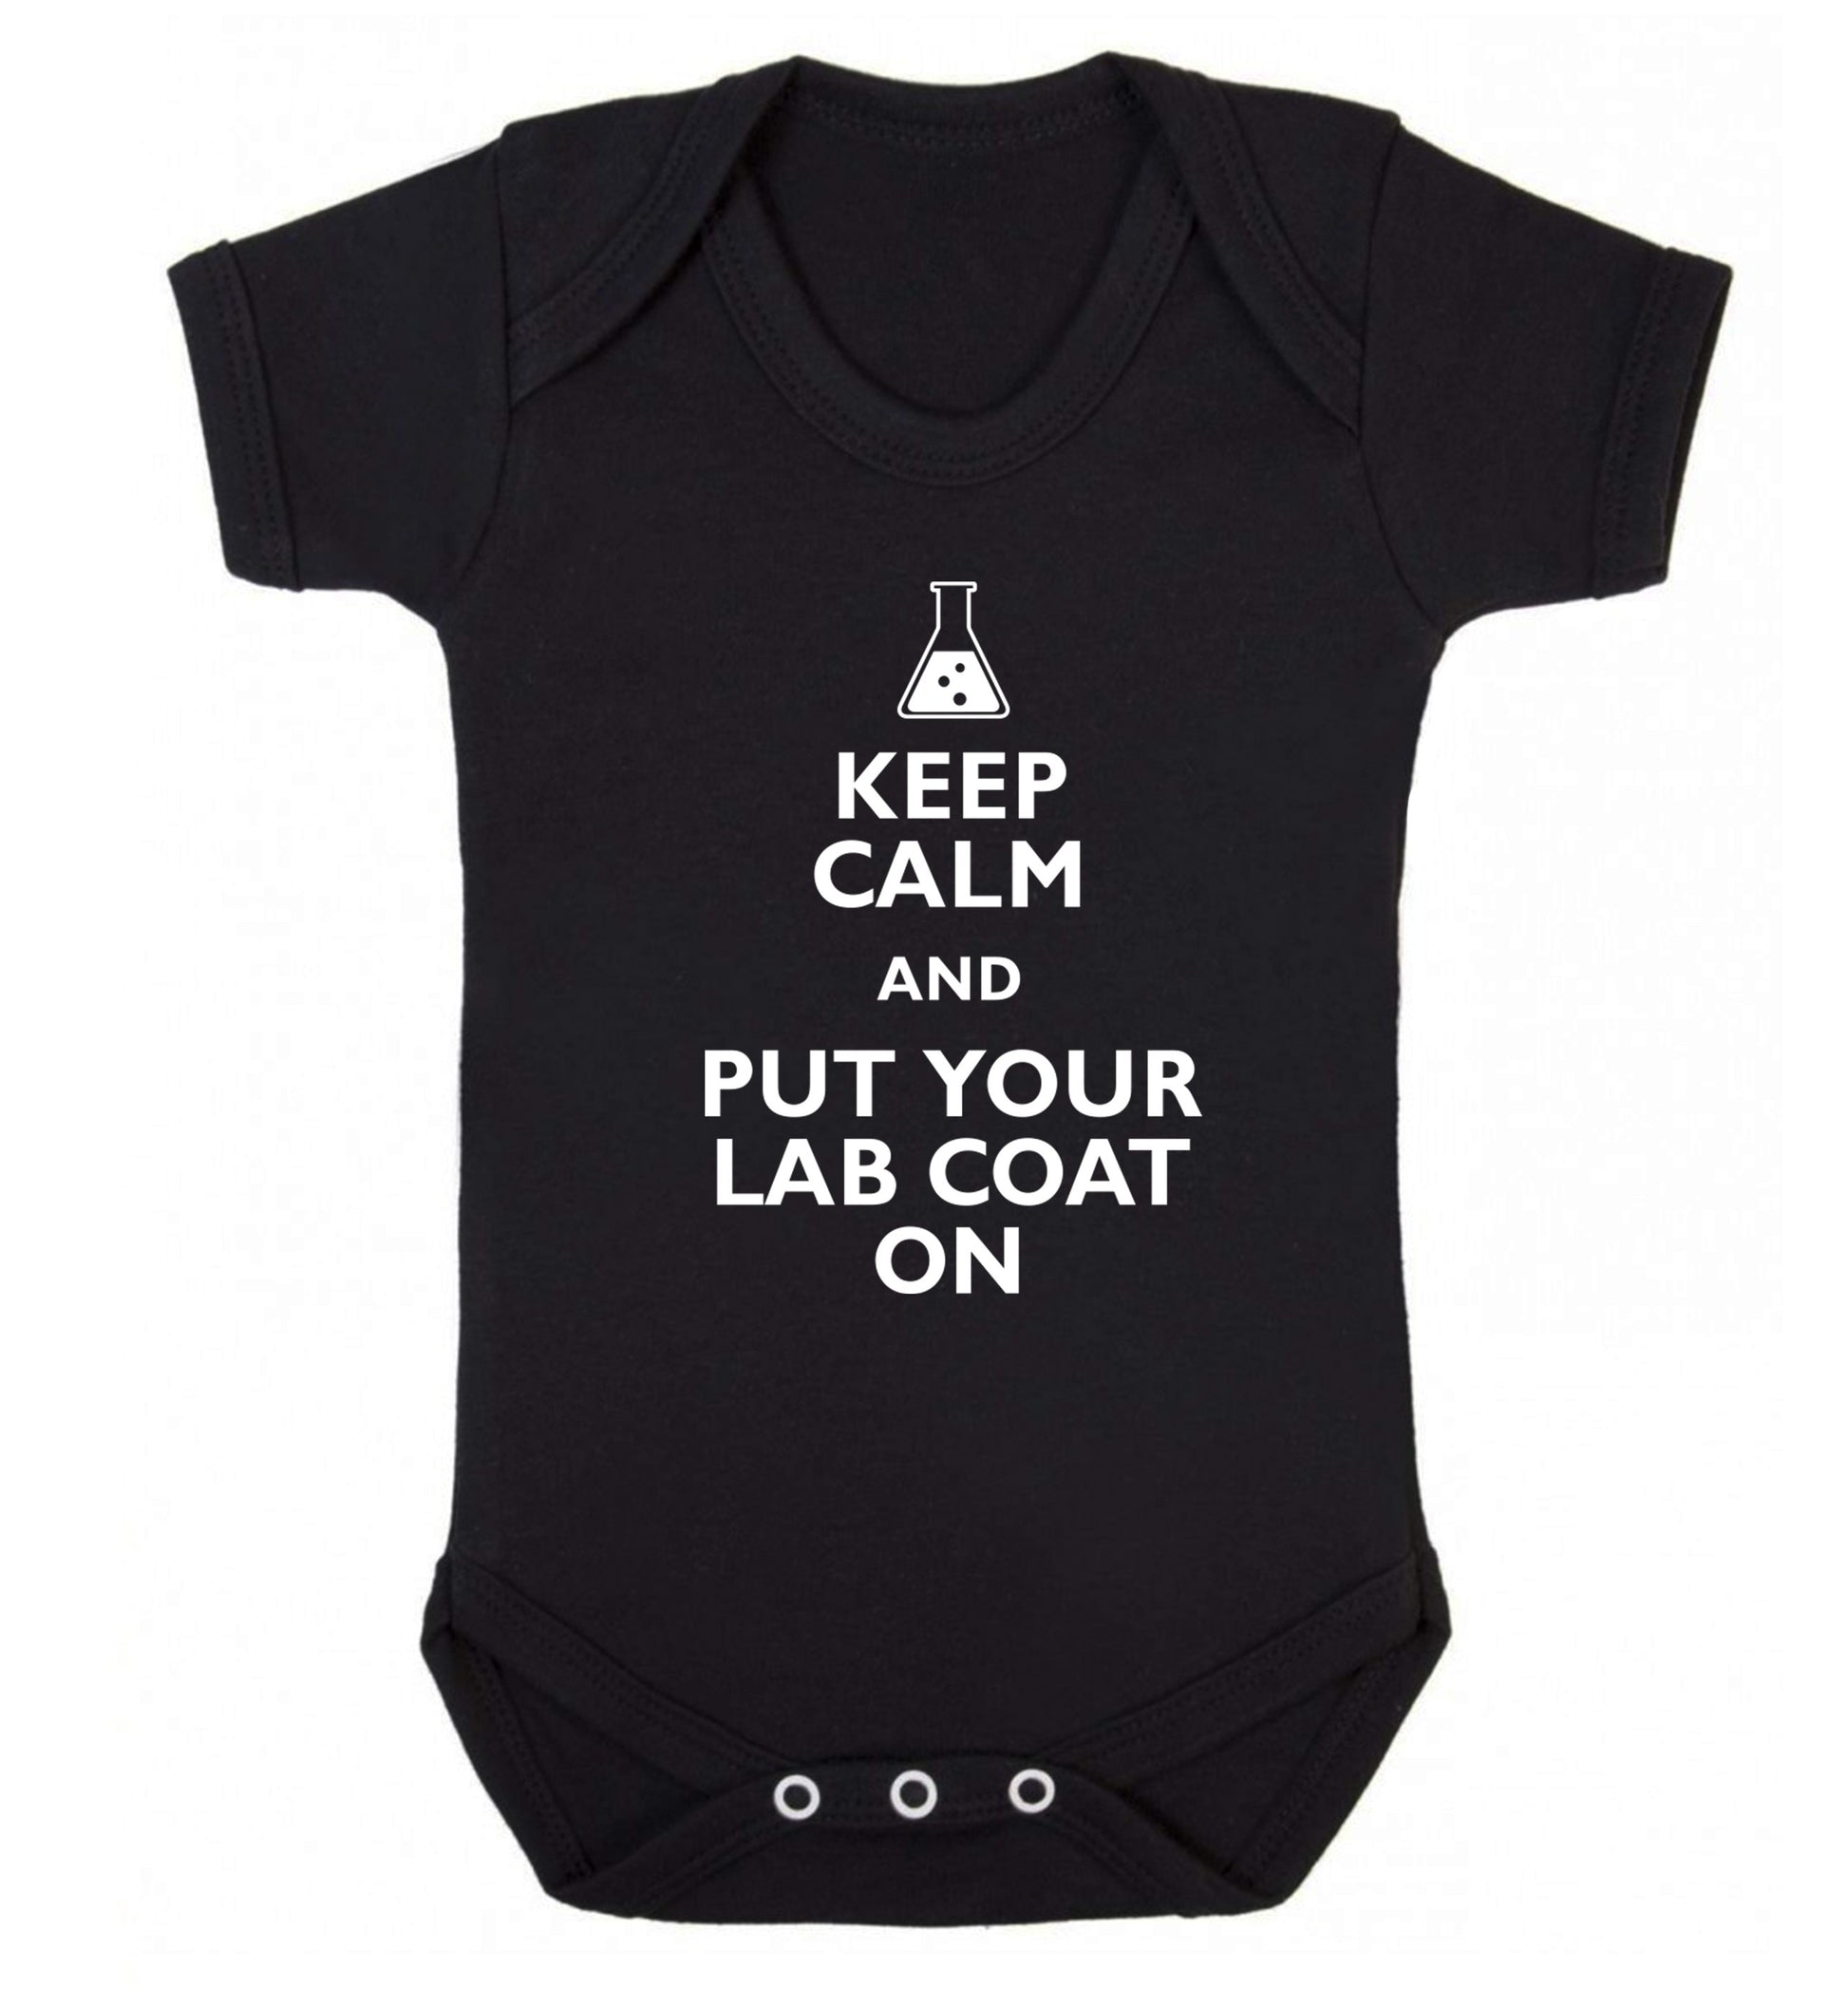 Keep calm and put your lab coat on Baby Vest black 18-24 months